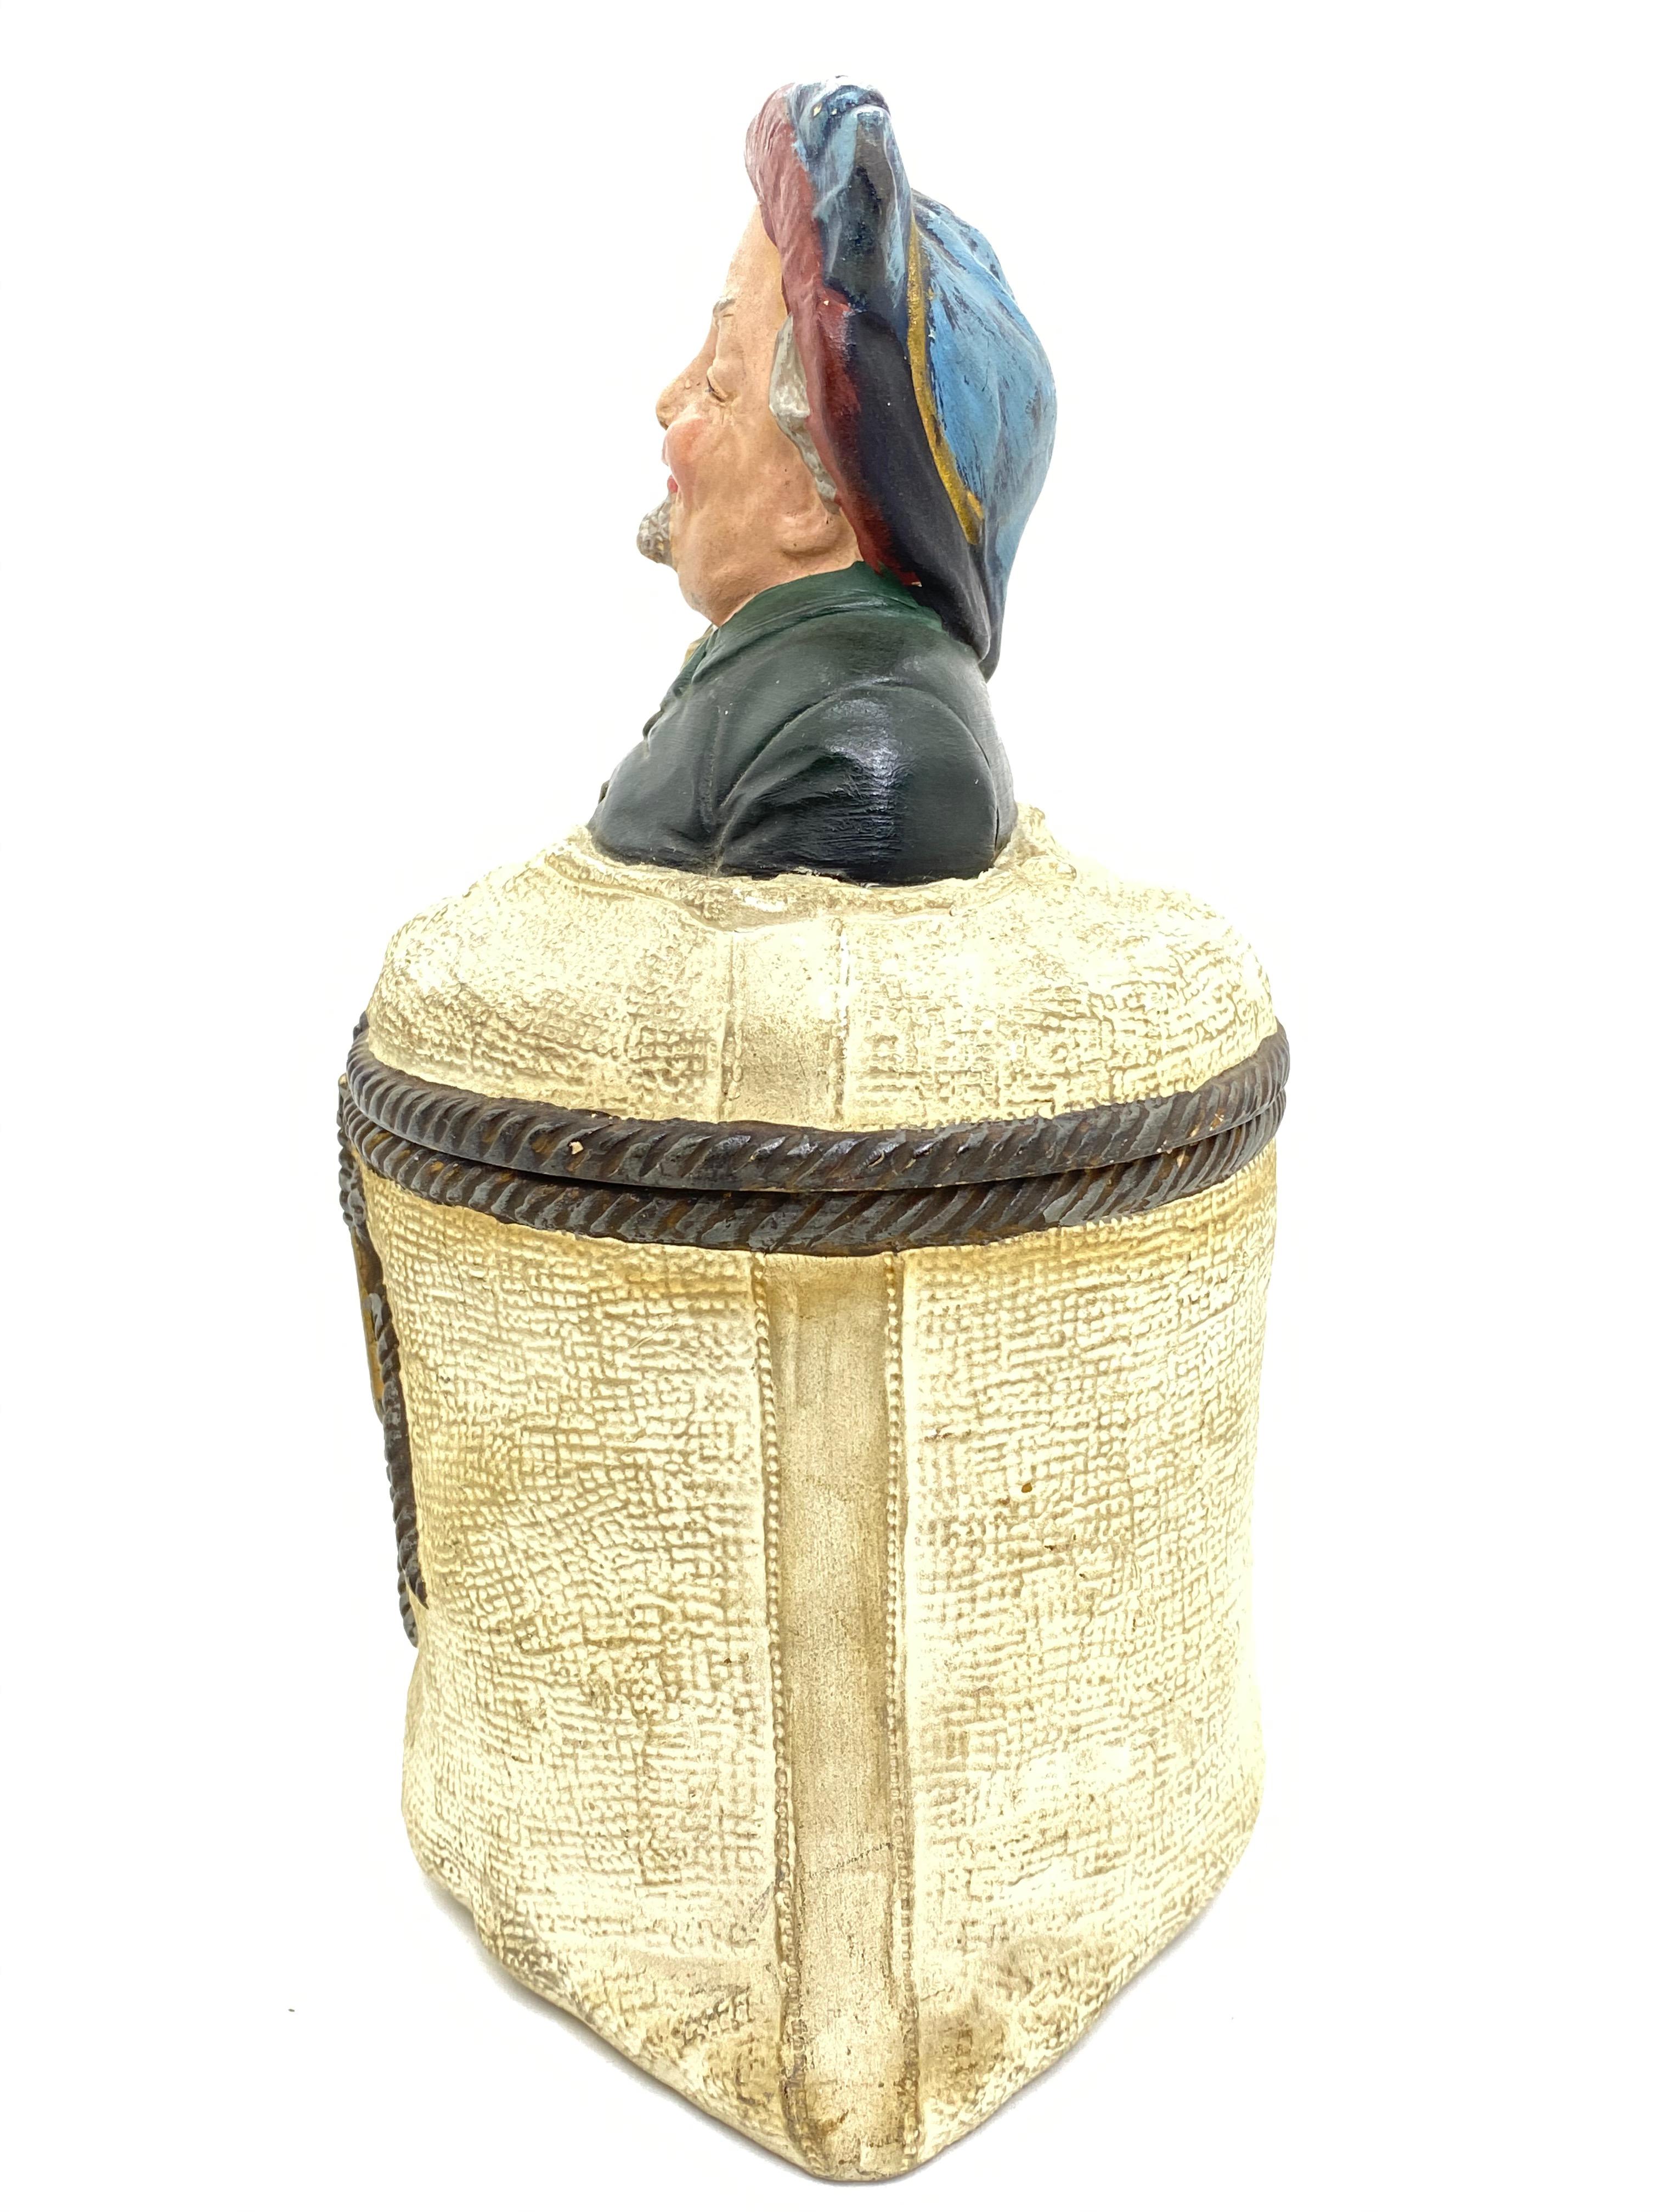 This offer is for one of our rare Majolica items, an exceptional tobacco box out of the sack series by Johann Maresch from the beginning of the 20th century. The beautiful worked Majolica box shows a flour bag with a Noble man sitting in it, who